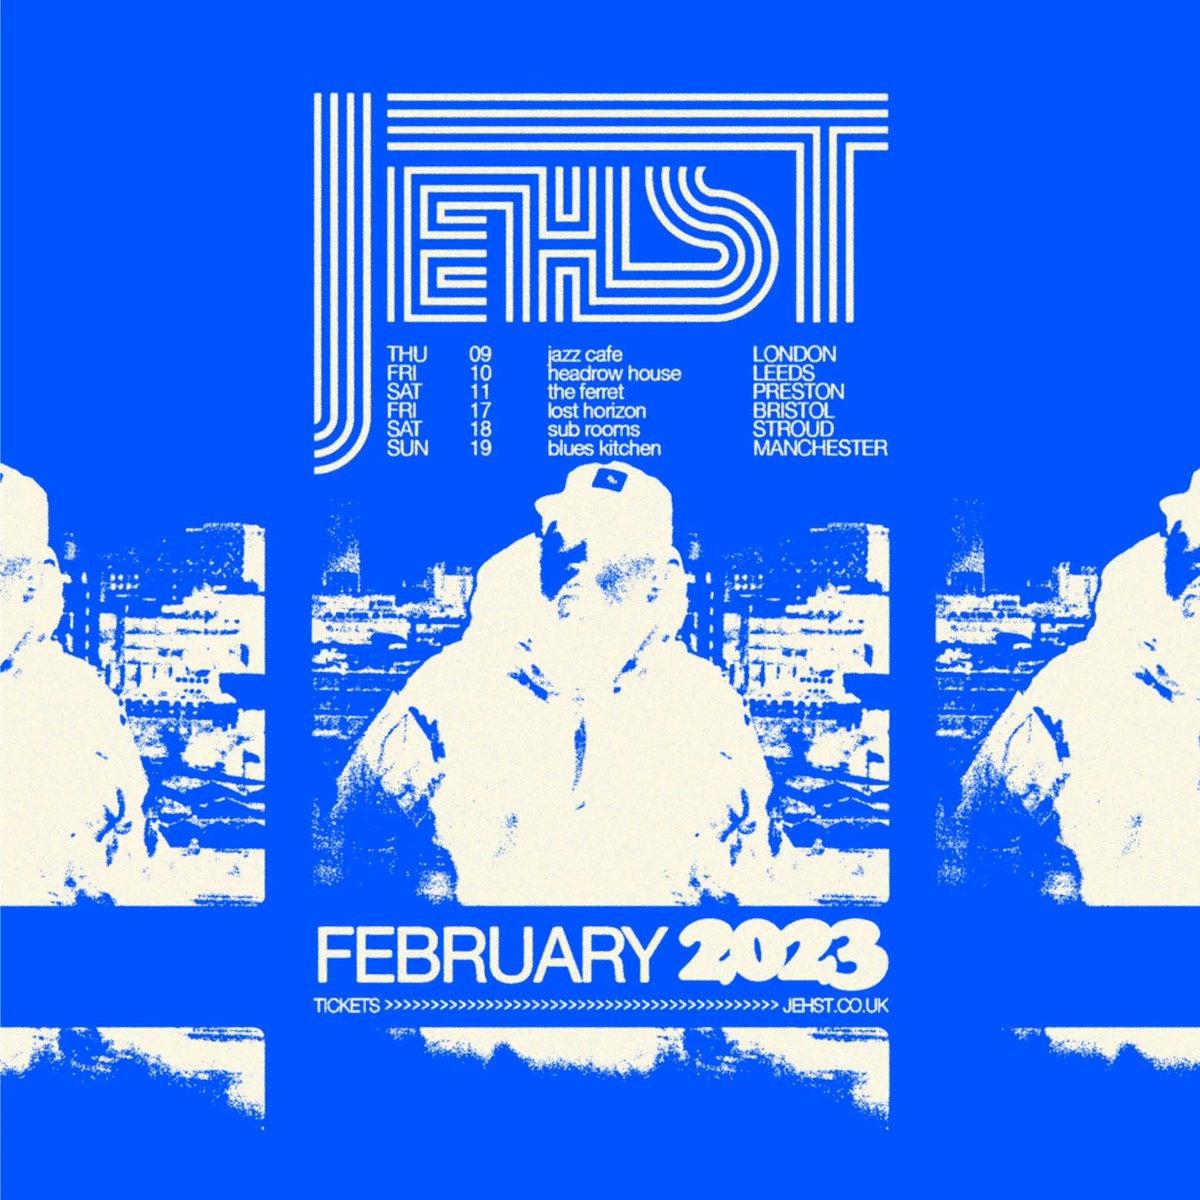 NEW SHOW Super excited to welcome back a true legend of the game... @jehstofficial plays @headrowhouse on Friday 10 February 💙 Tickets on sale now 👀